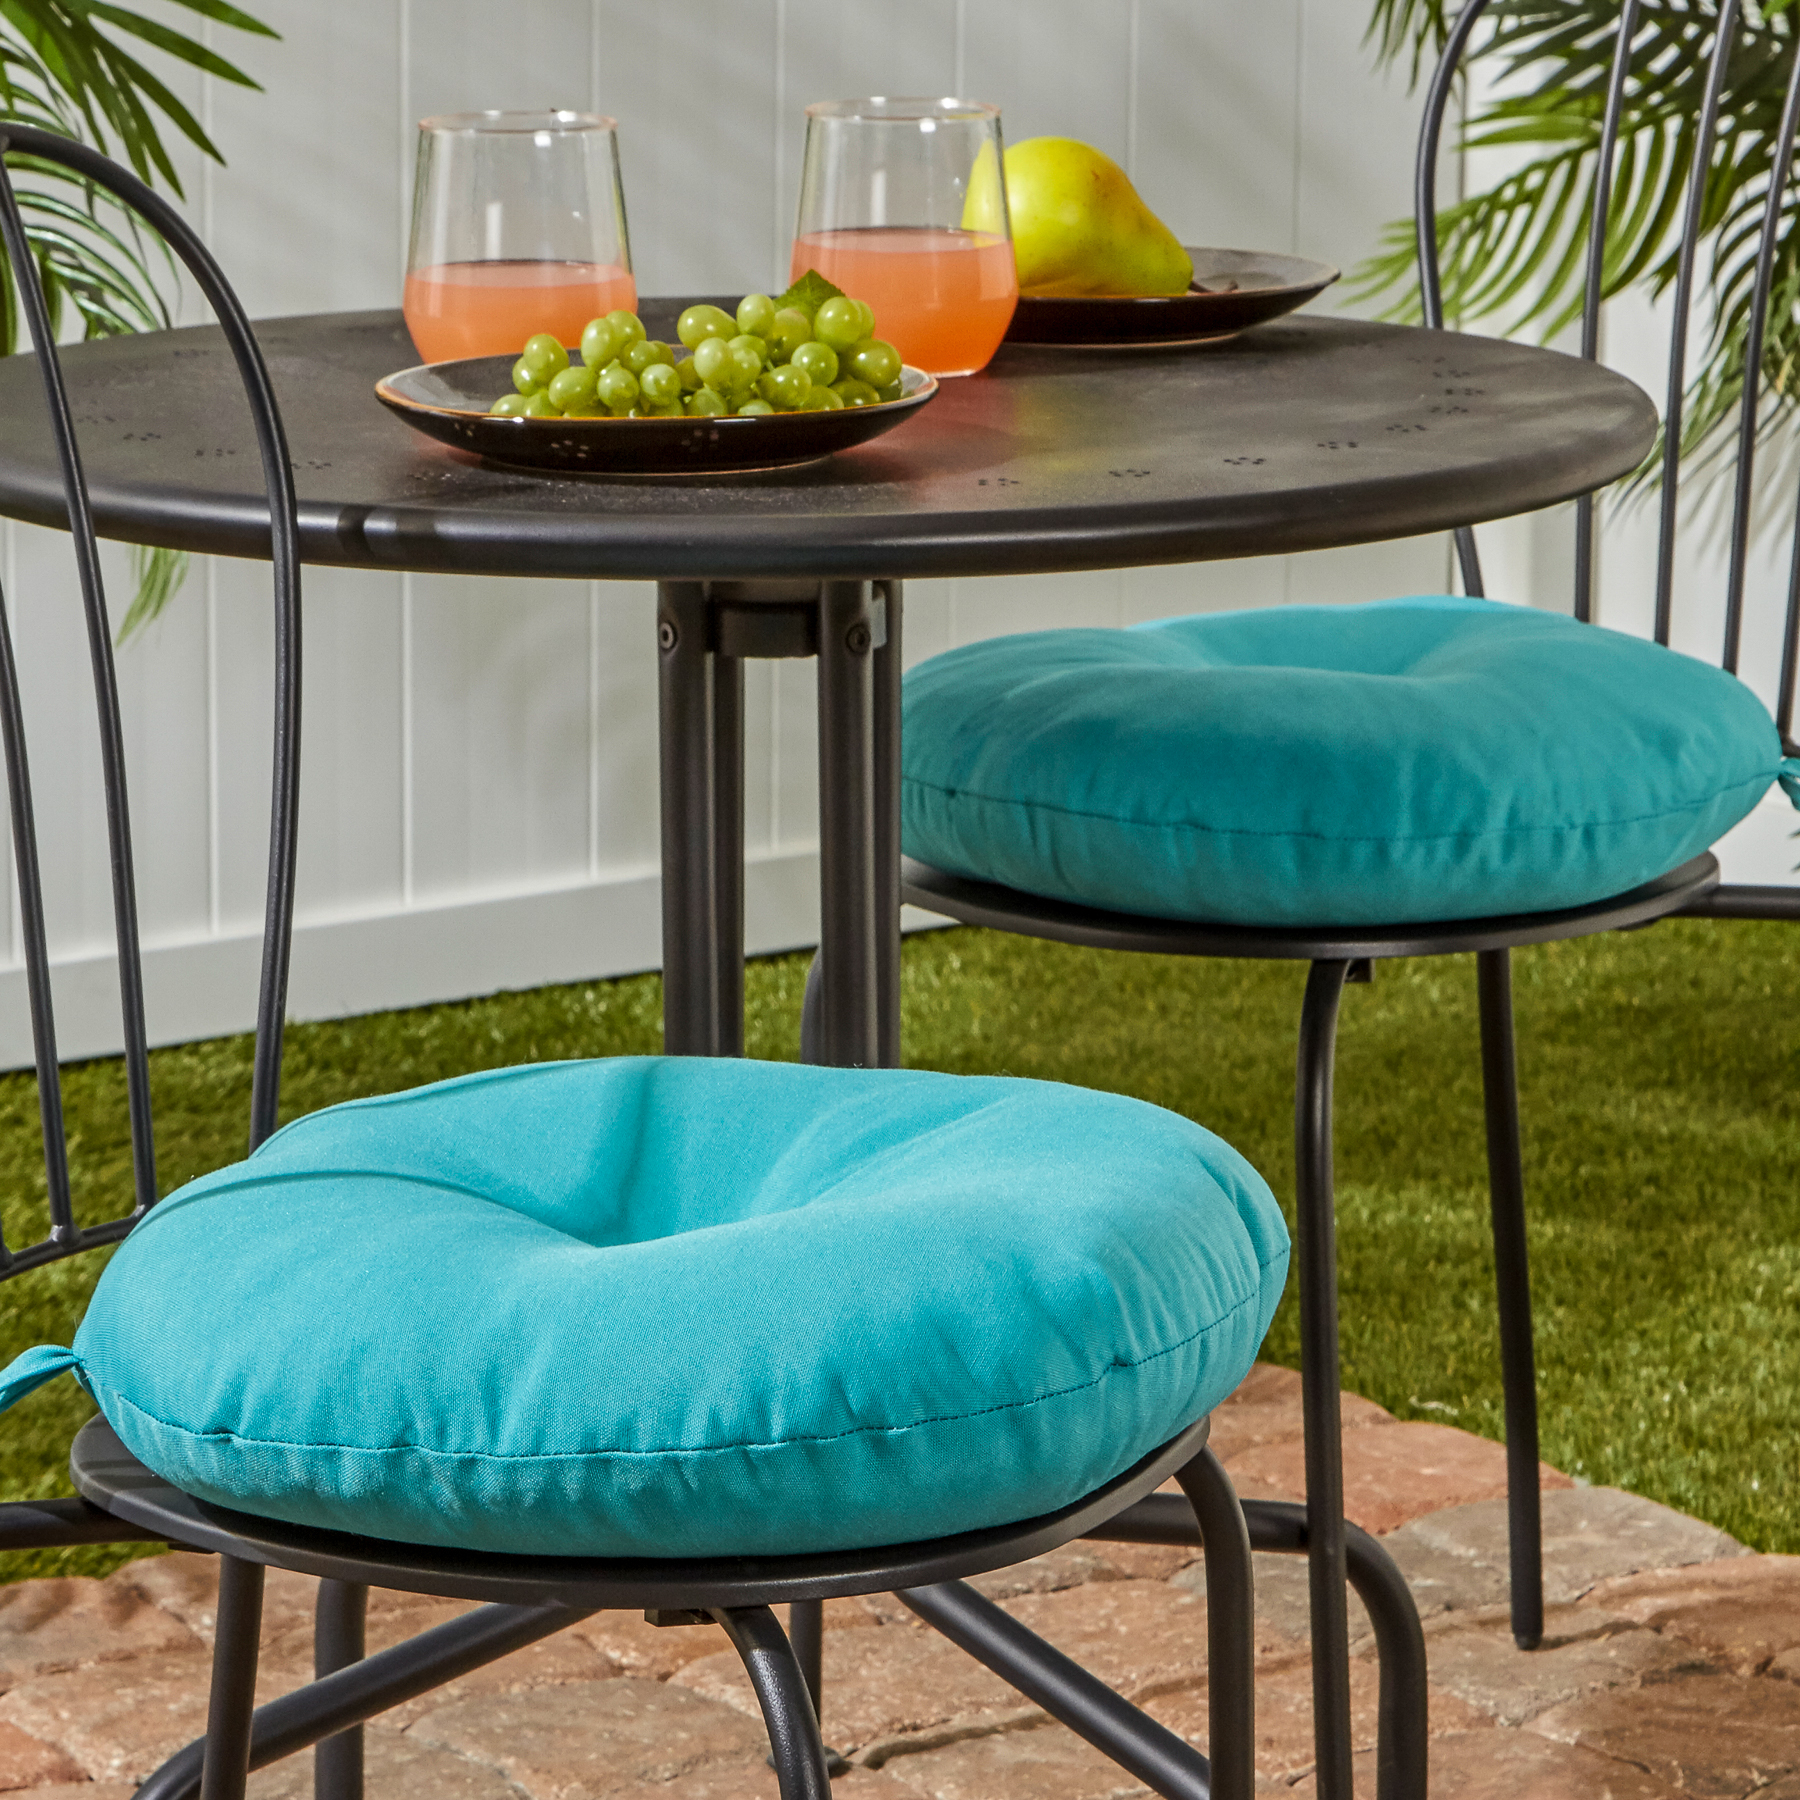 Greendale Home Fashions Teal 15 in. Round Outdoor Reversible Bistro Seat Cushion (Set of 2) - image 5 of 6